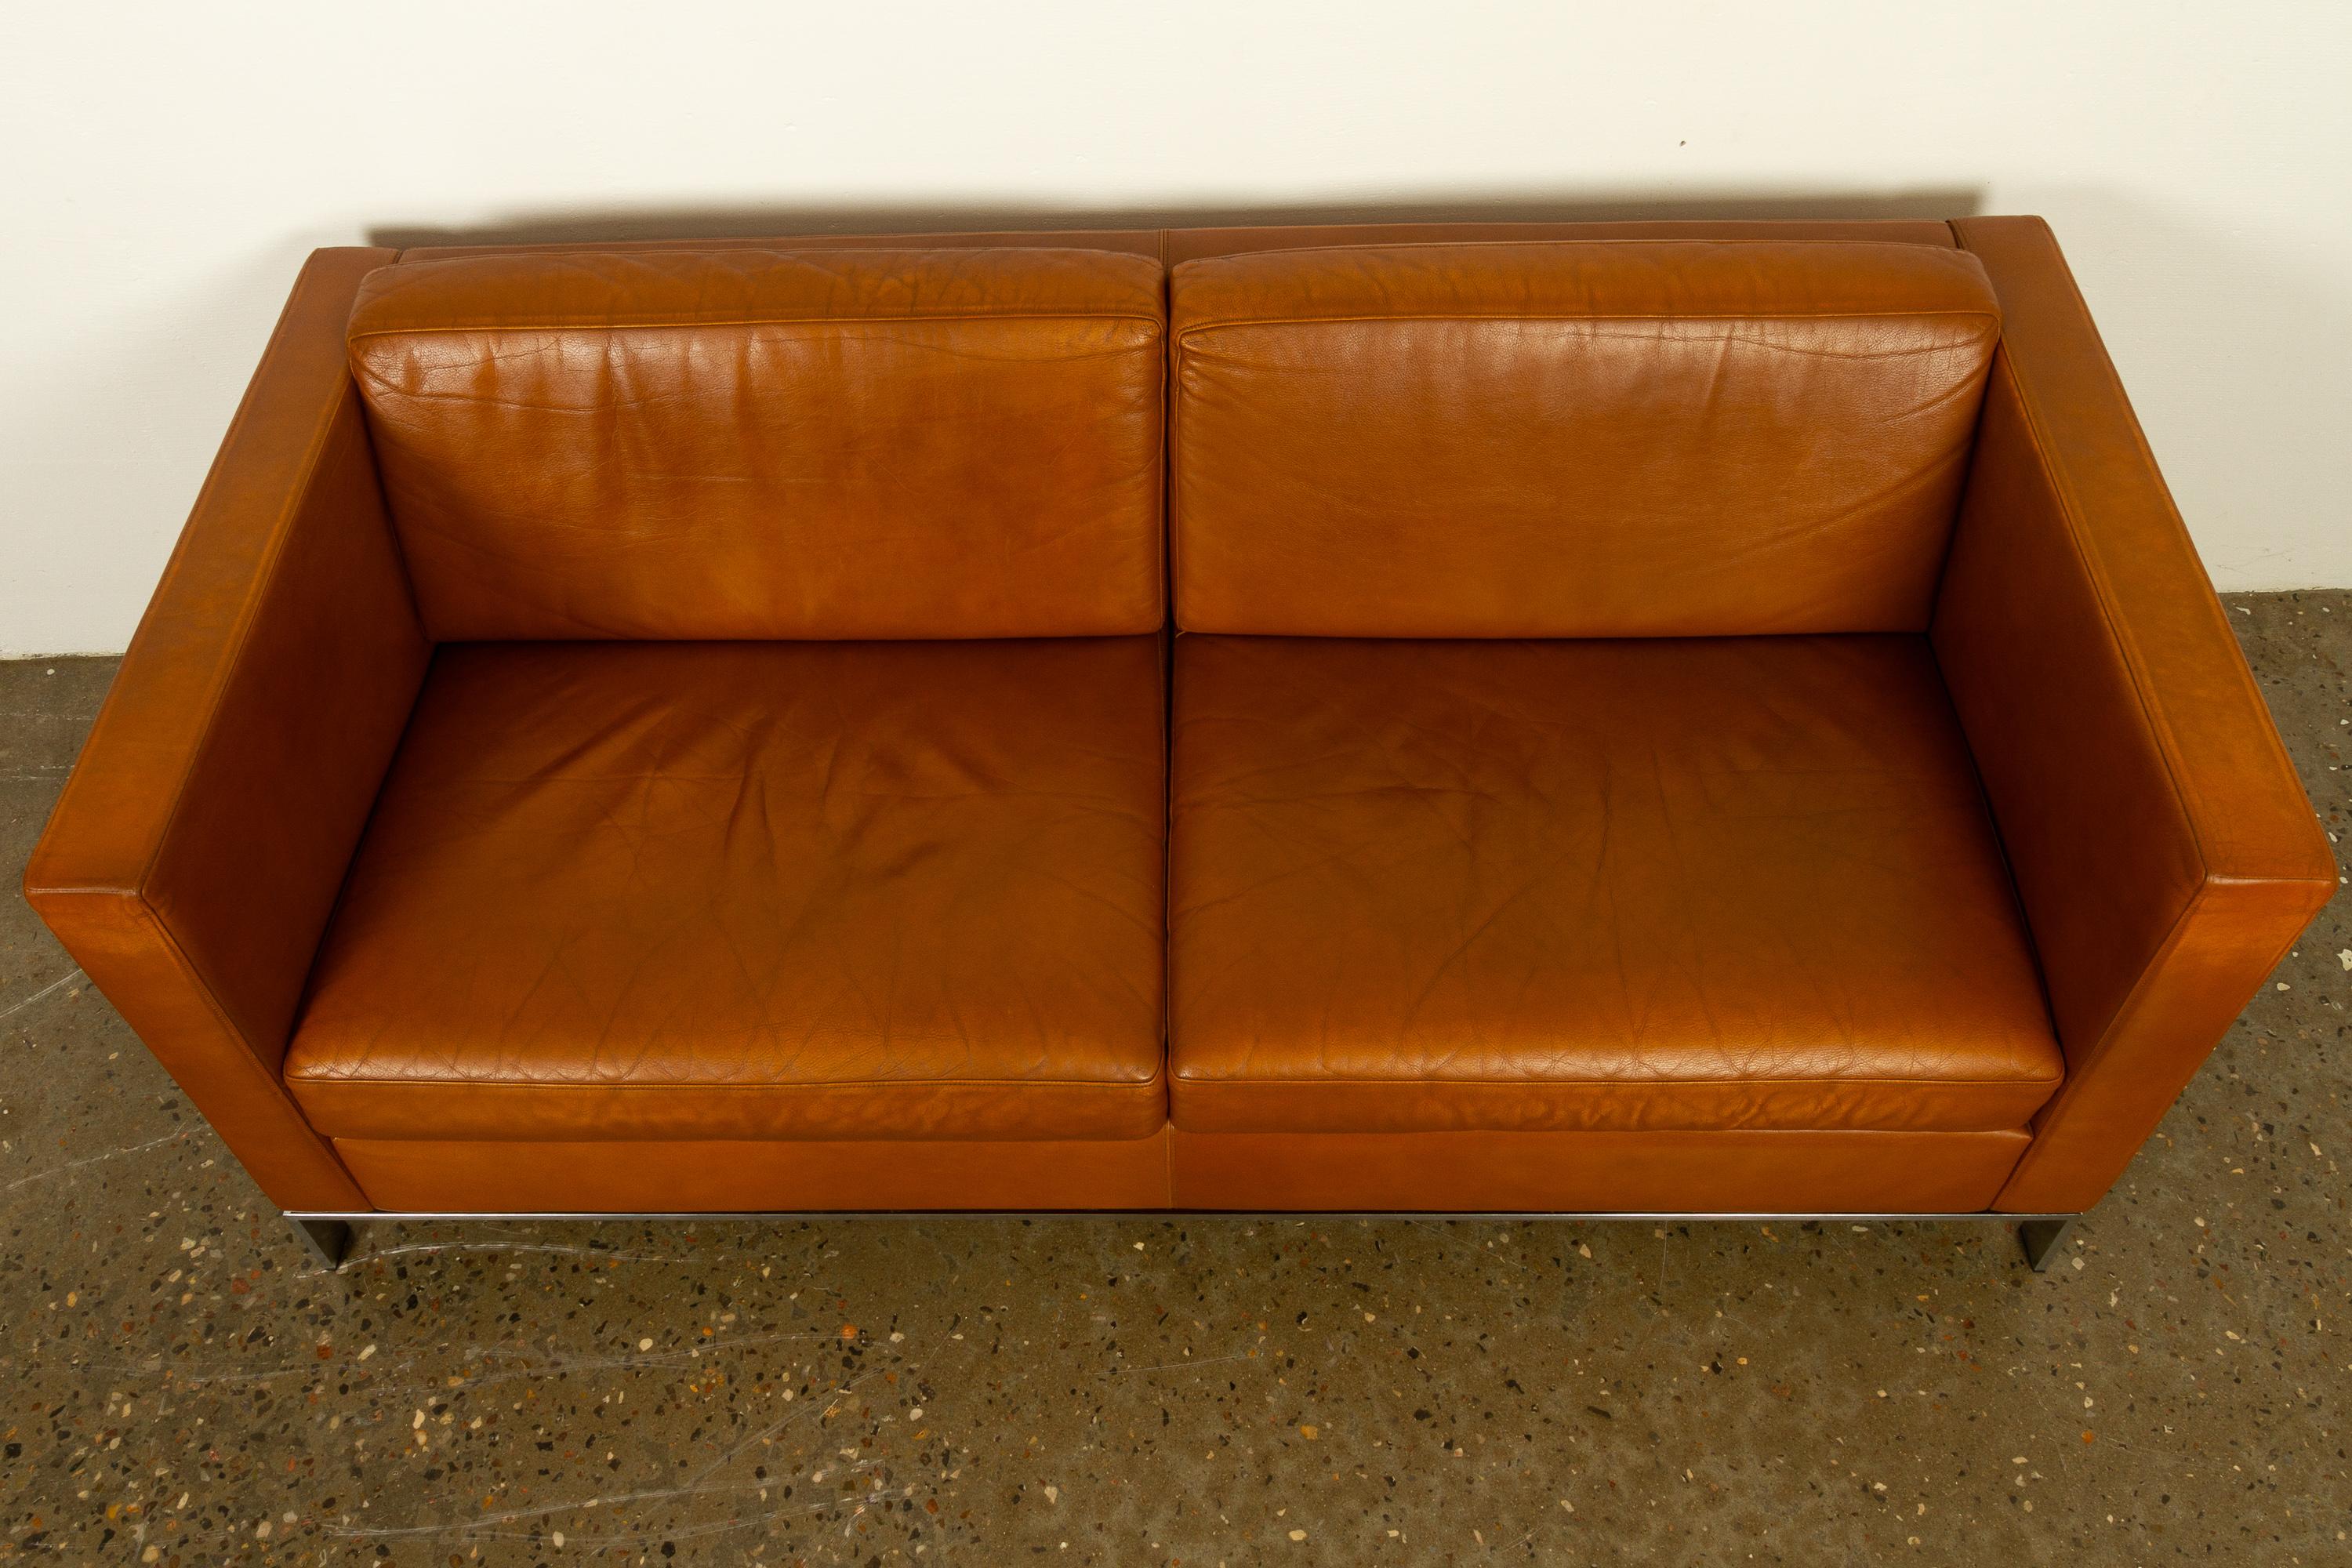 German Norman Foster Living Room Set in Tan Leather for Walter Knoll, 2000s